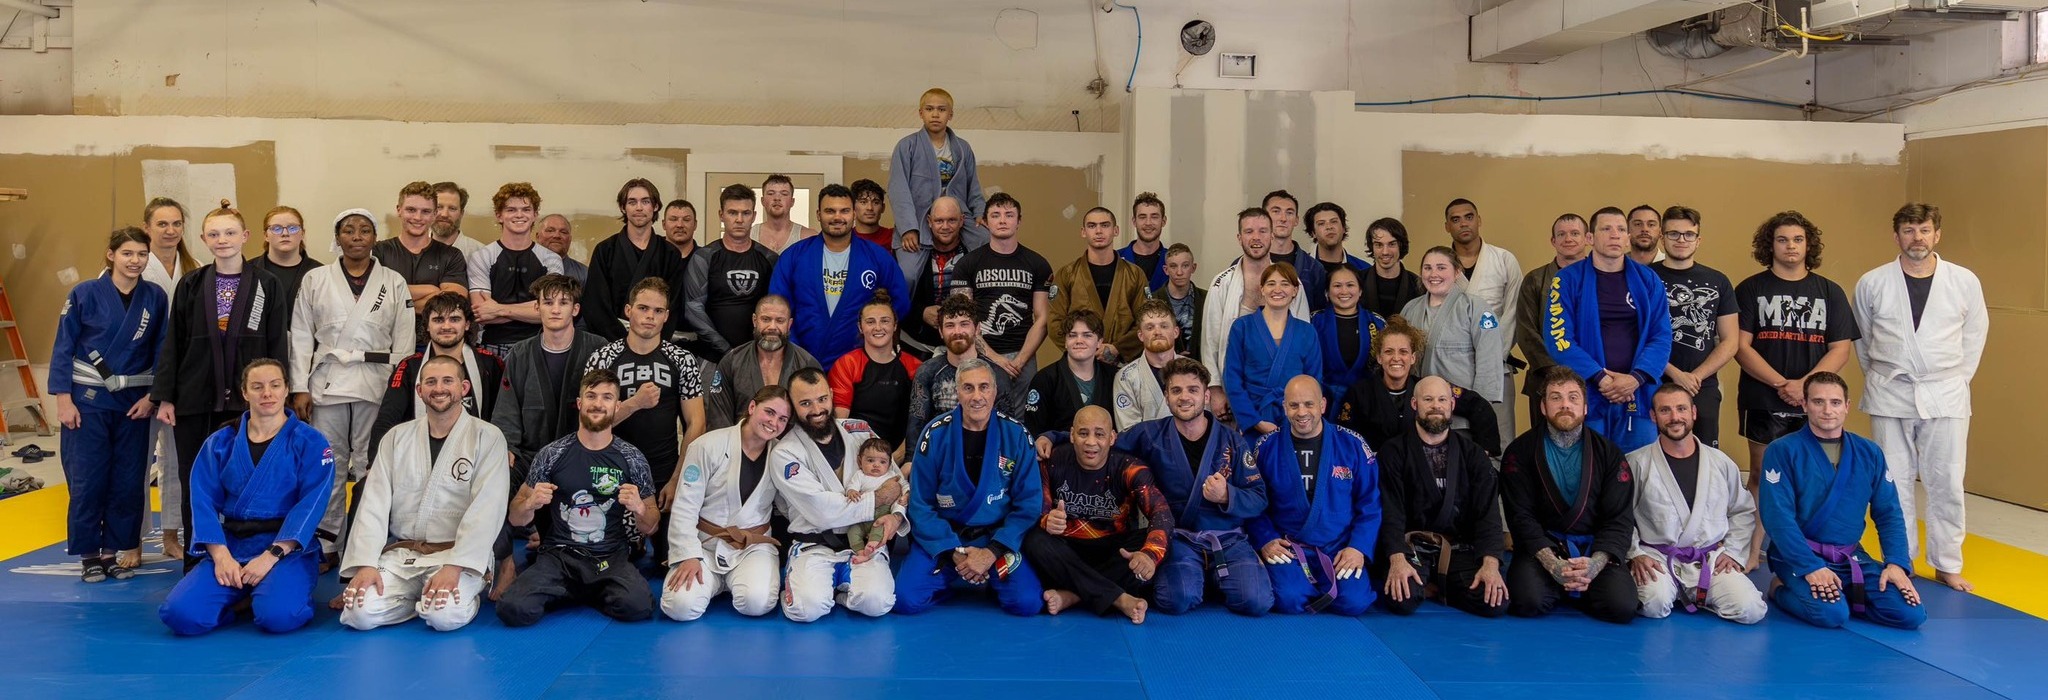 students and instructors in a group pic at Good Tree MMA gym in Dunmore, near Scranton